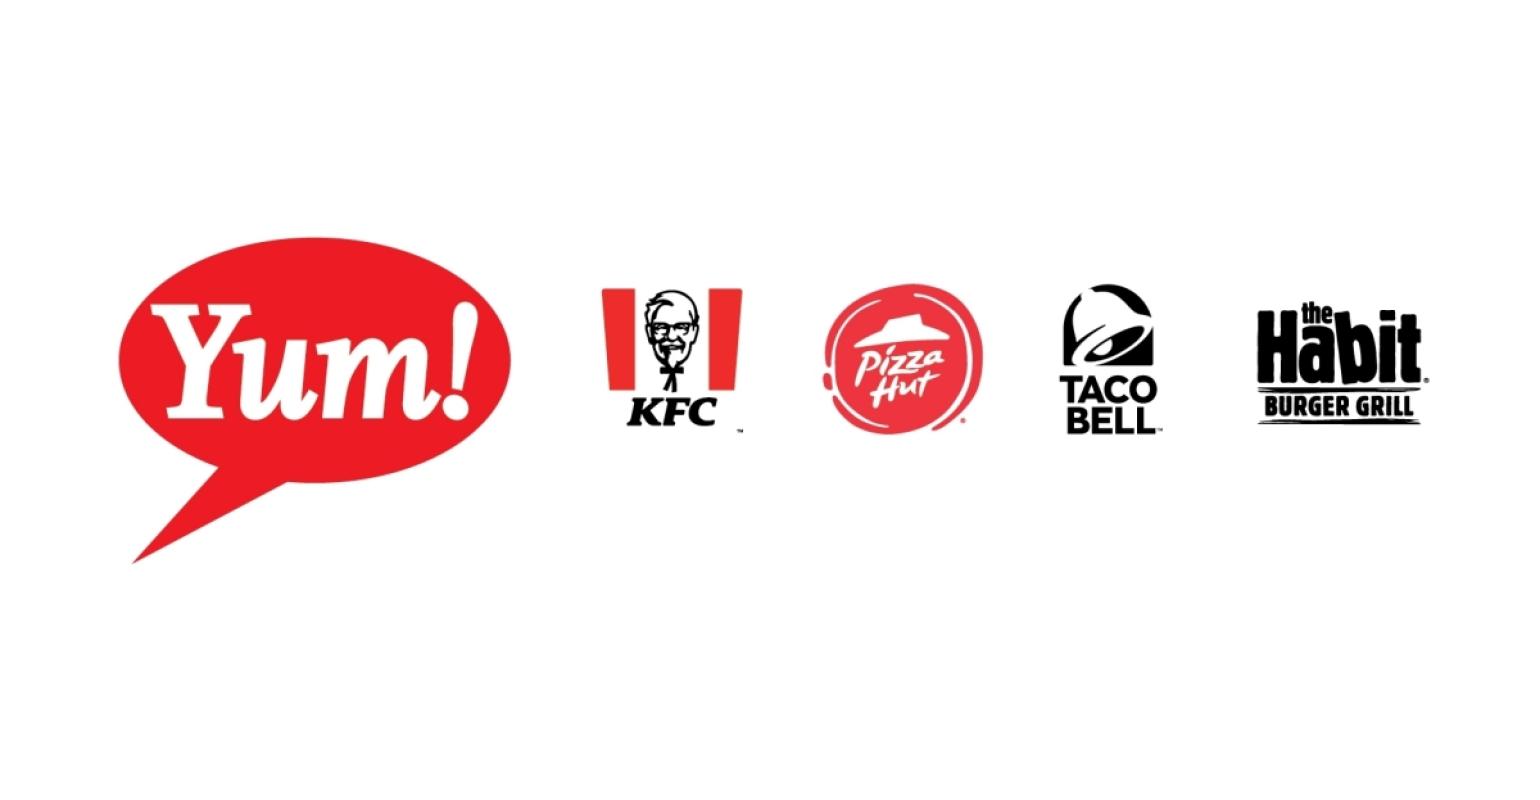 The biggest takeaways from Yum Brands' Investor Day